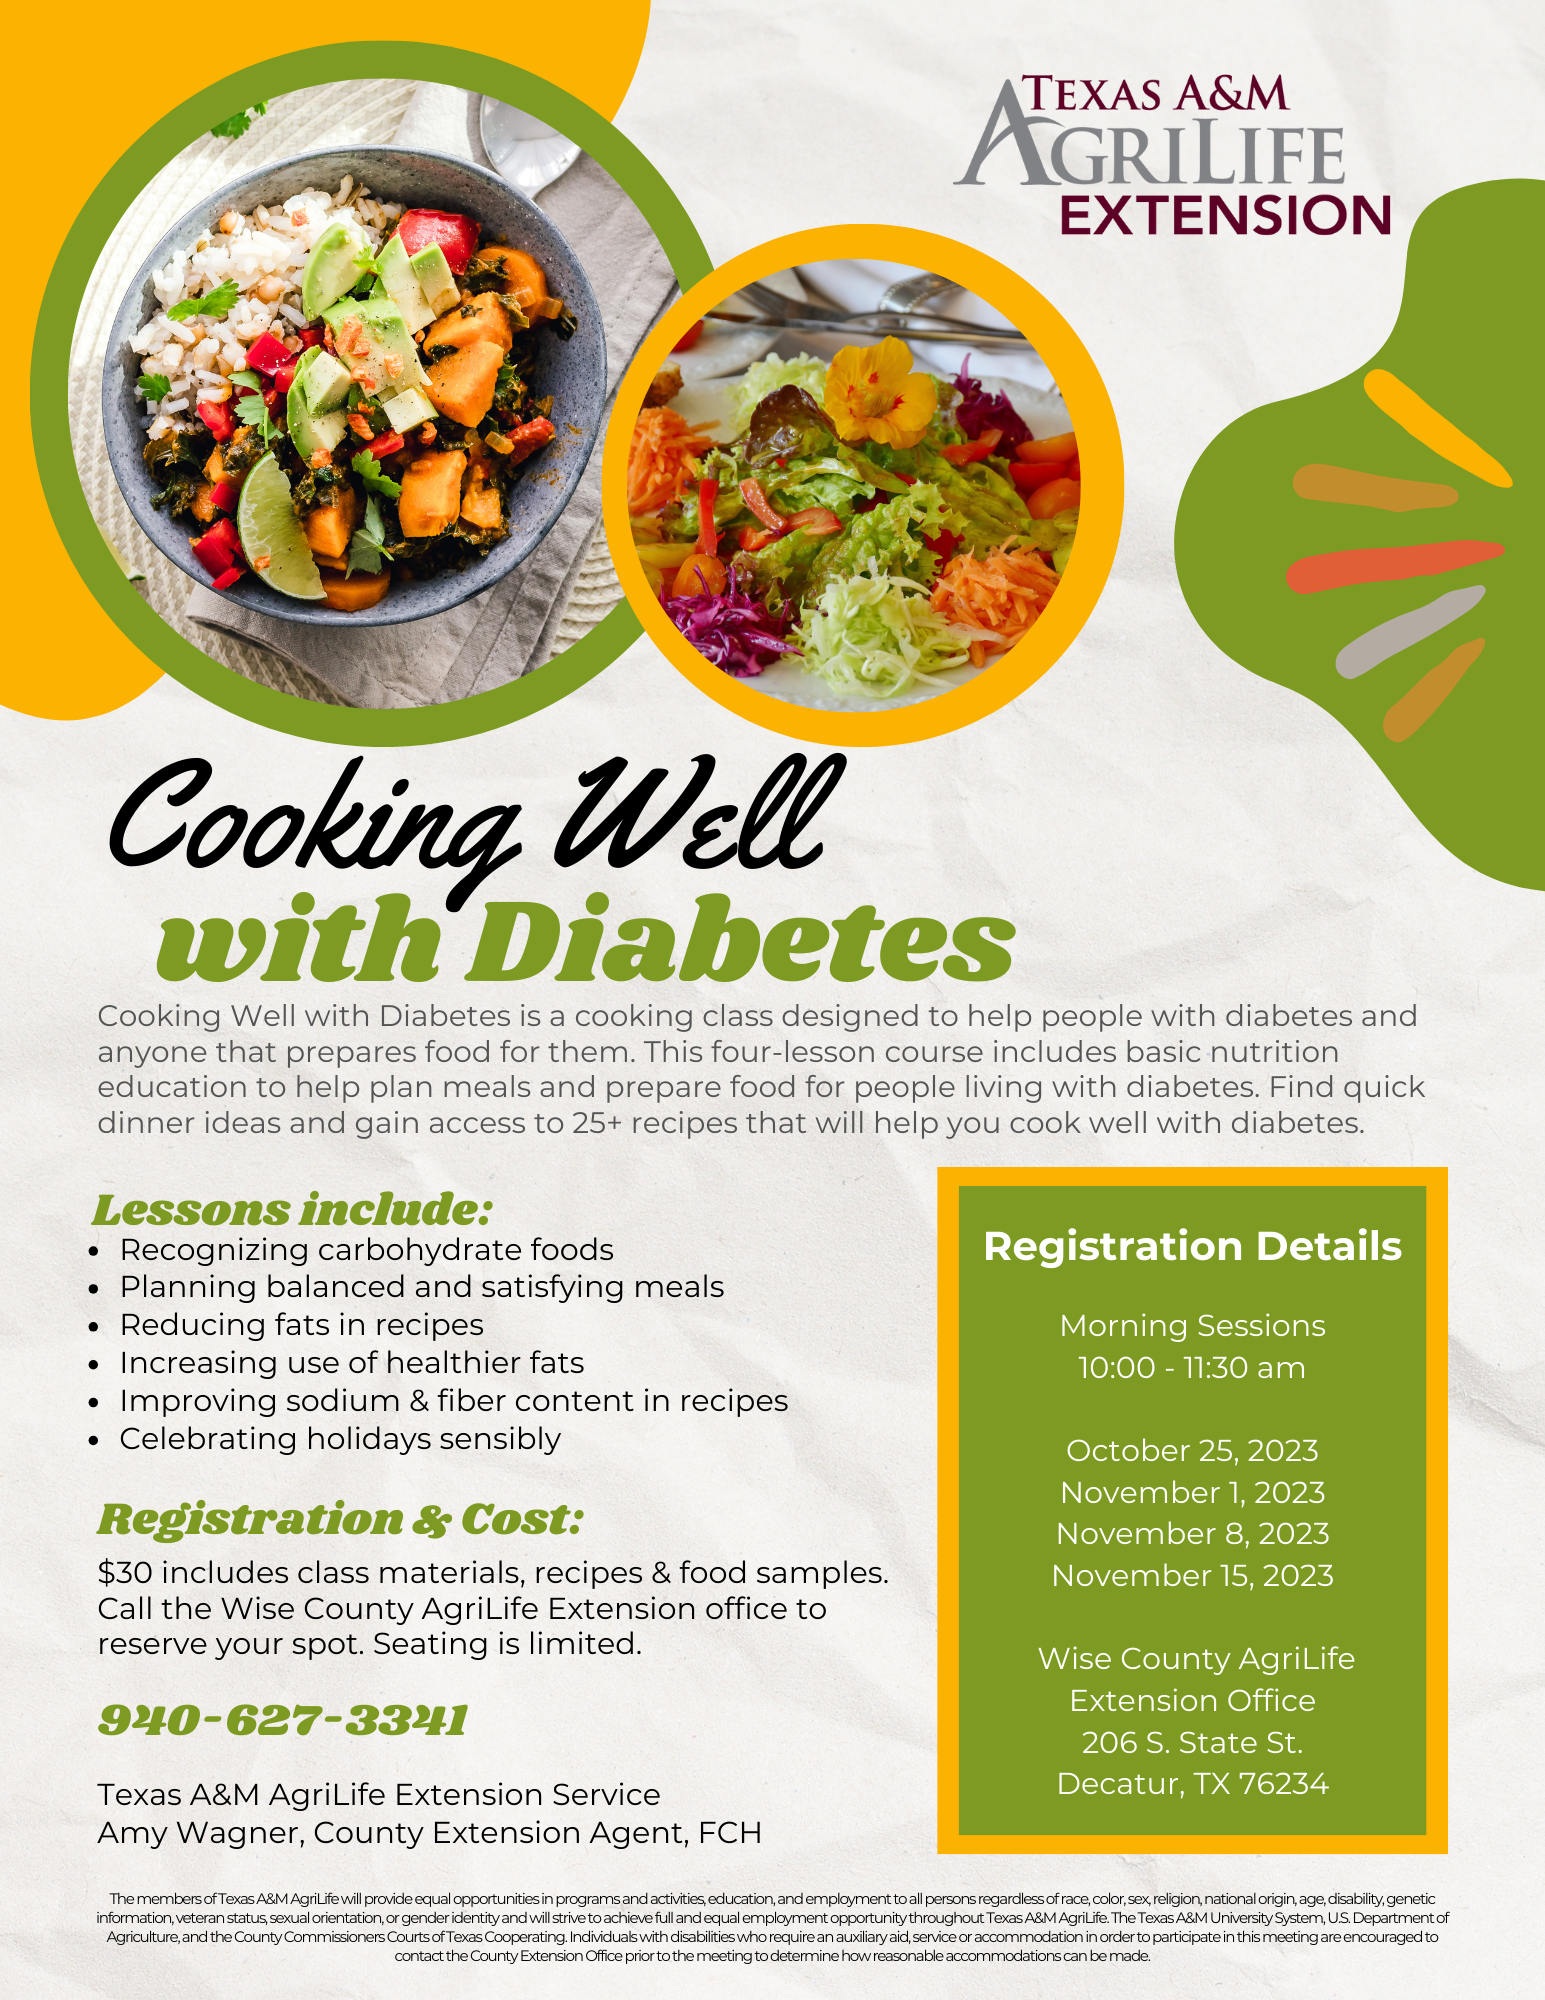 Cooking Well with Diabetes - Wise